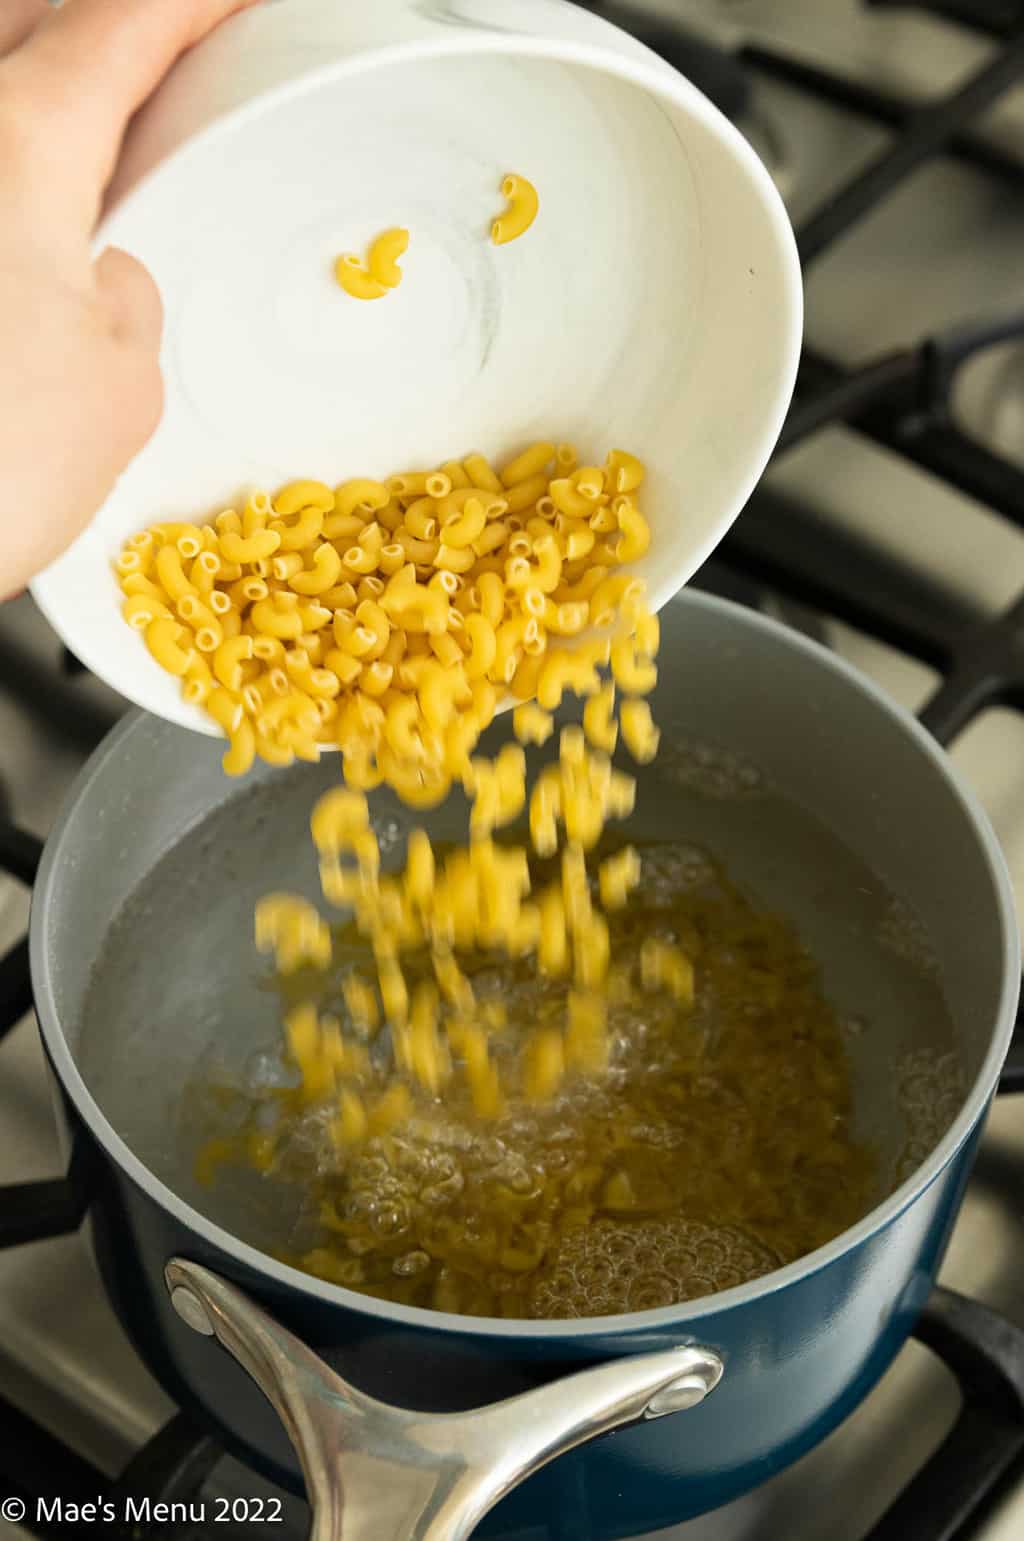 Pouring macaroni into a pot of boiling water.